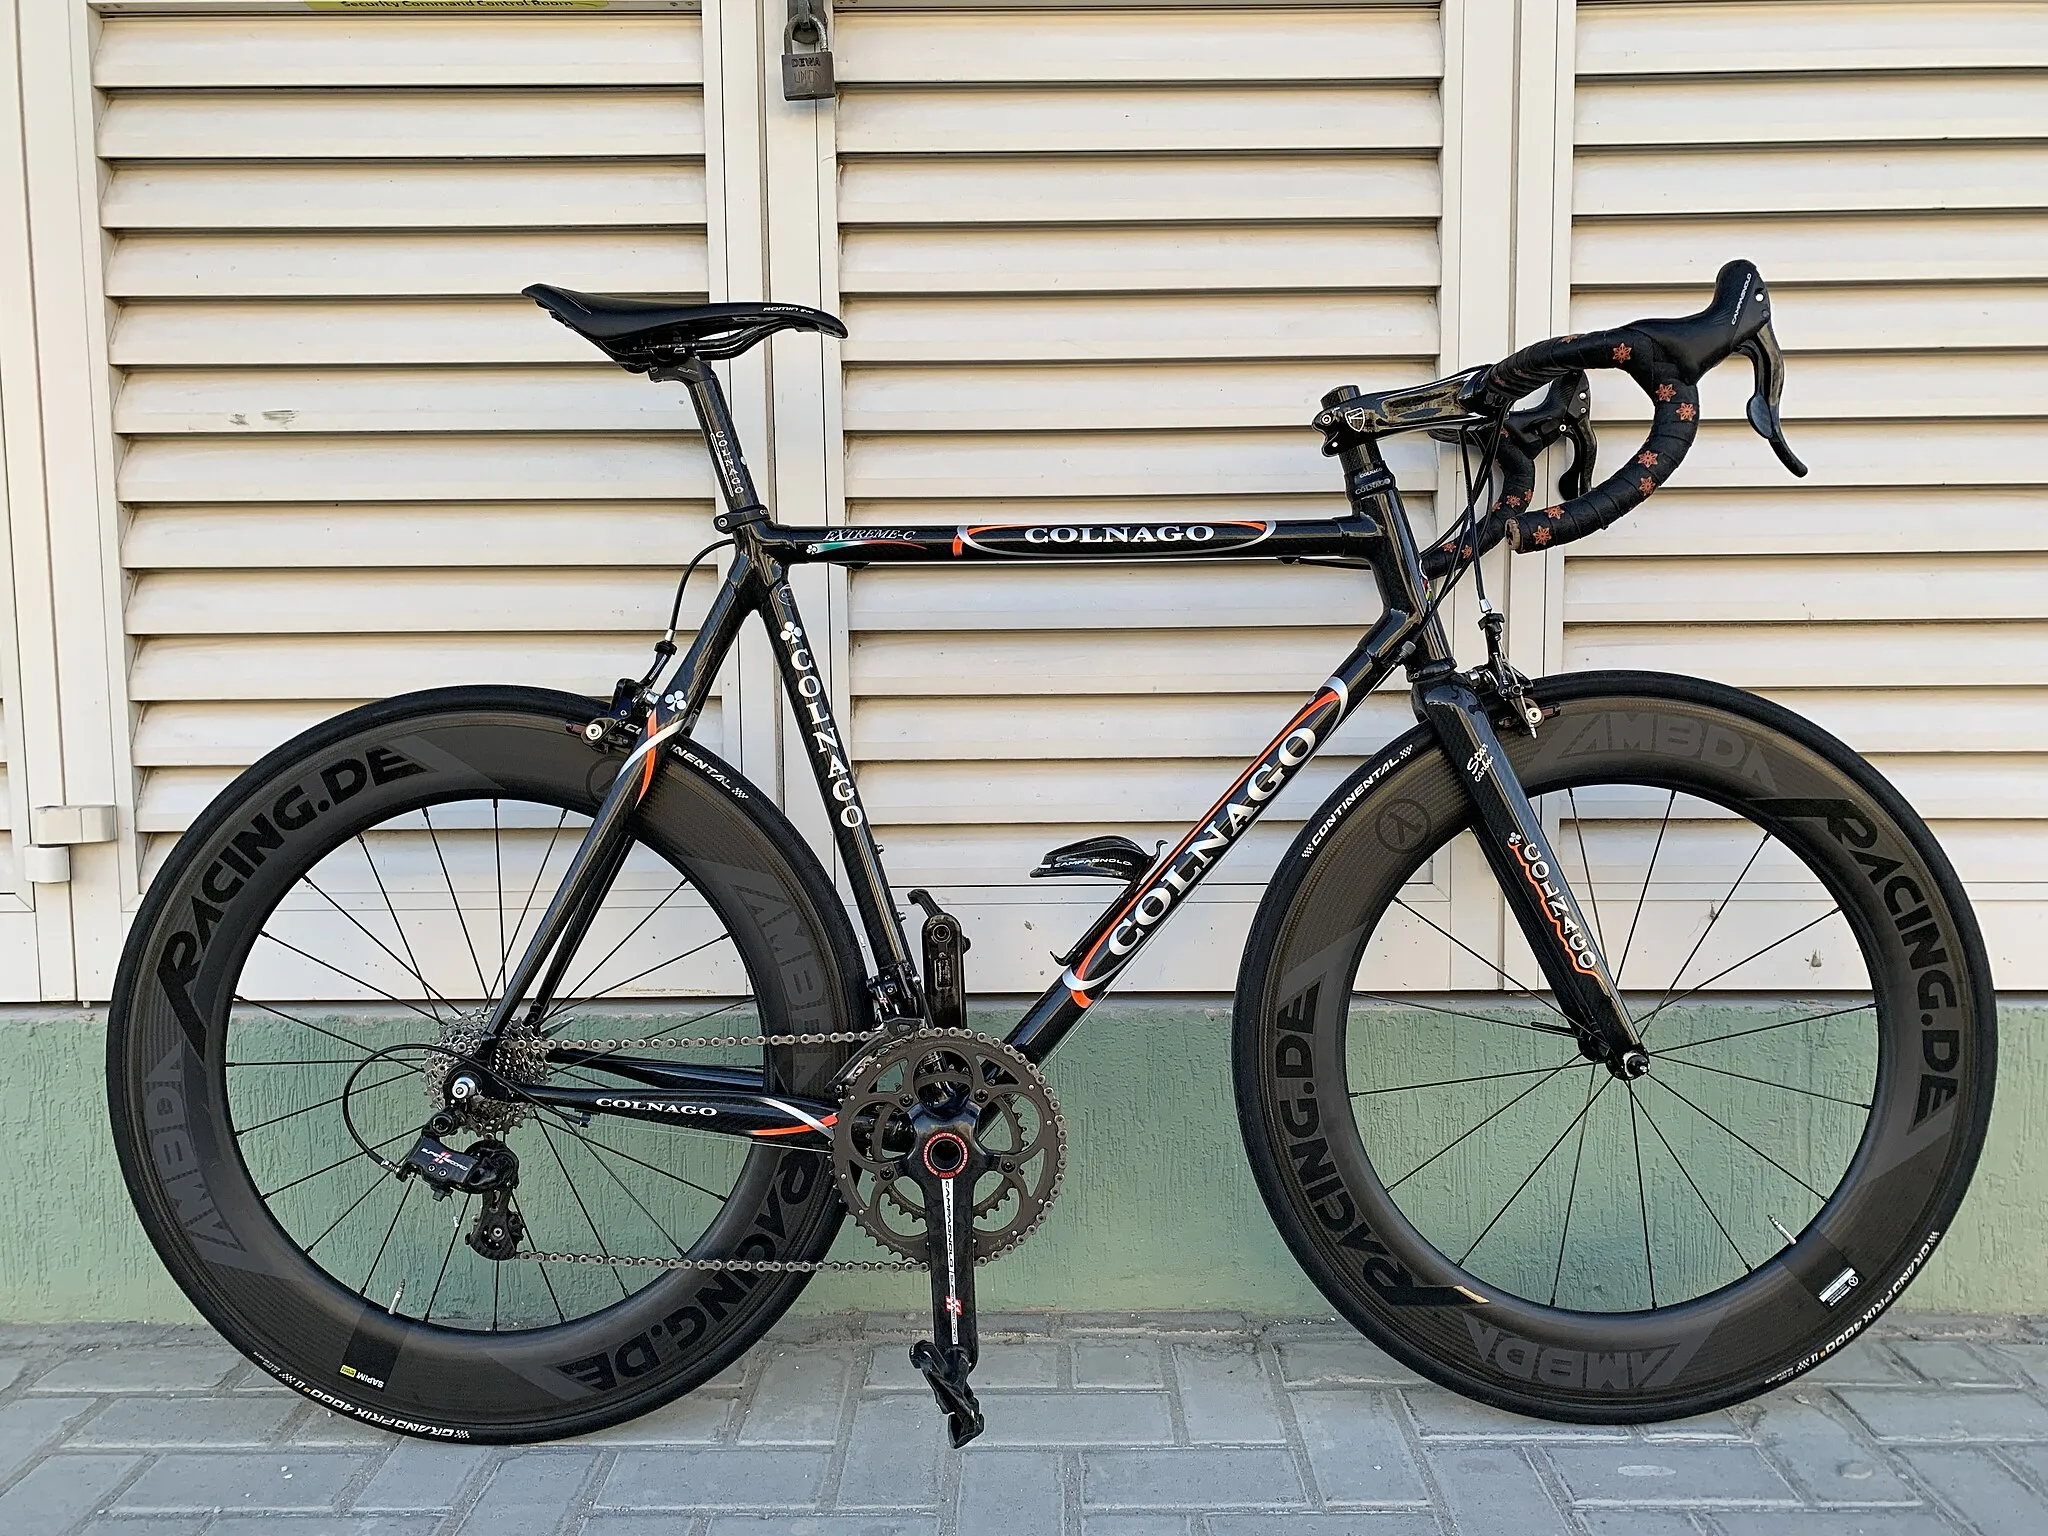 Photo showing: A Colnago Extreme C model